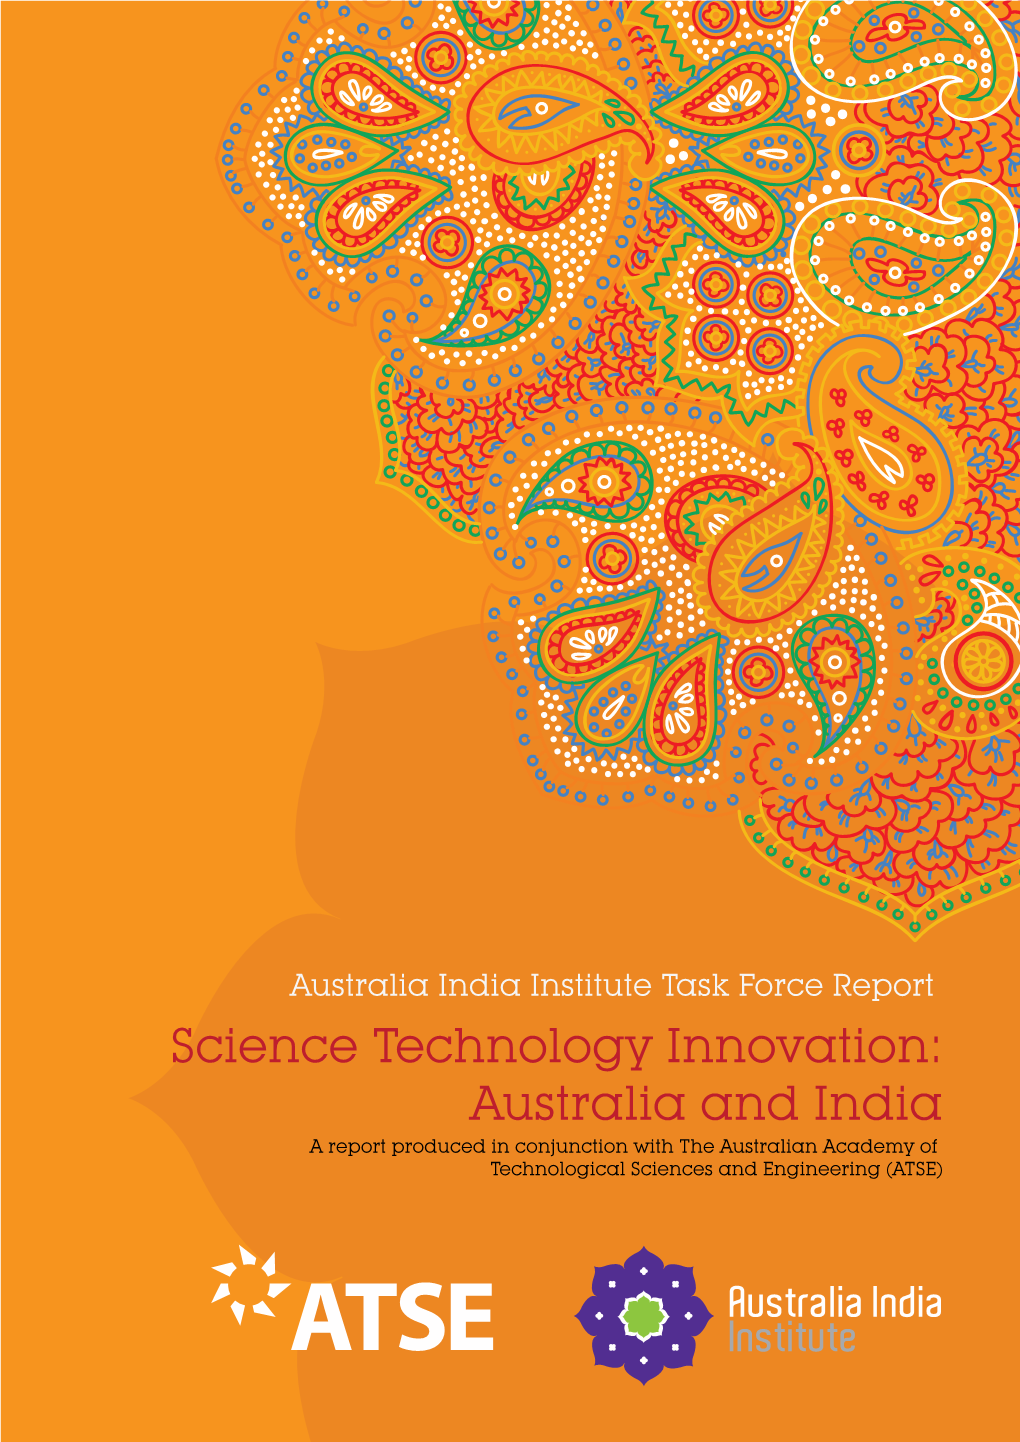 Science Technology Innovation: Australia and India